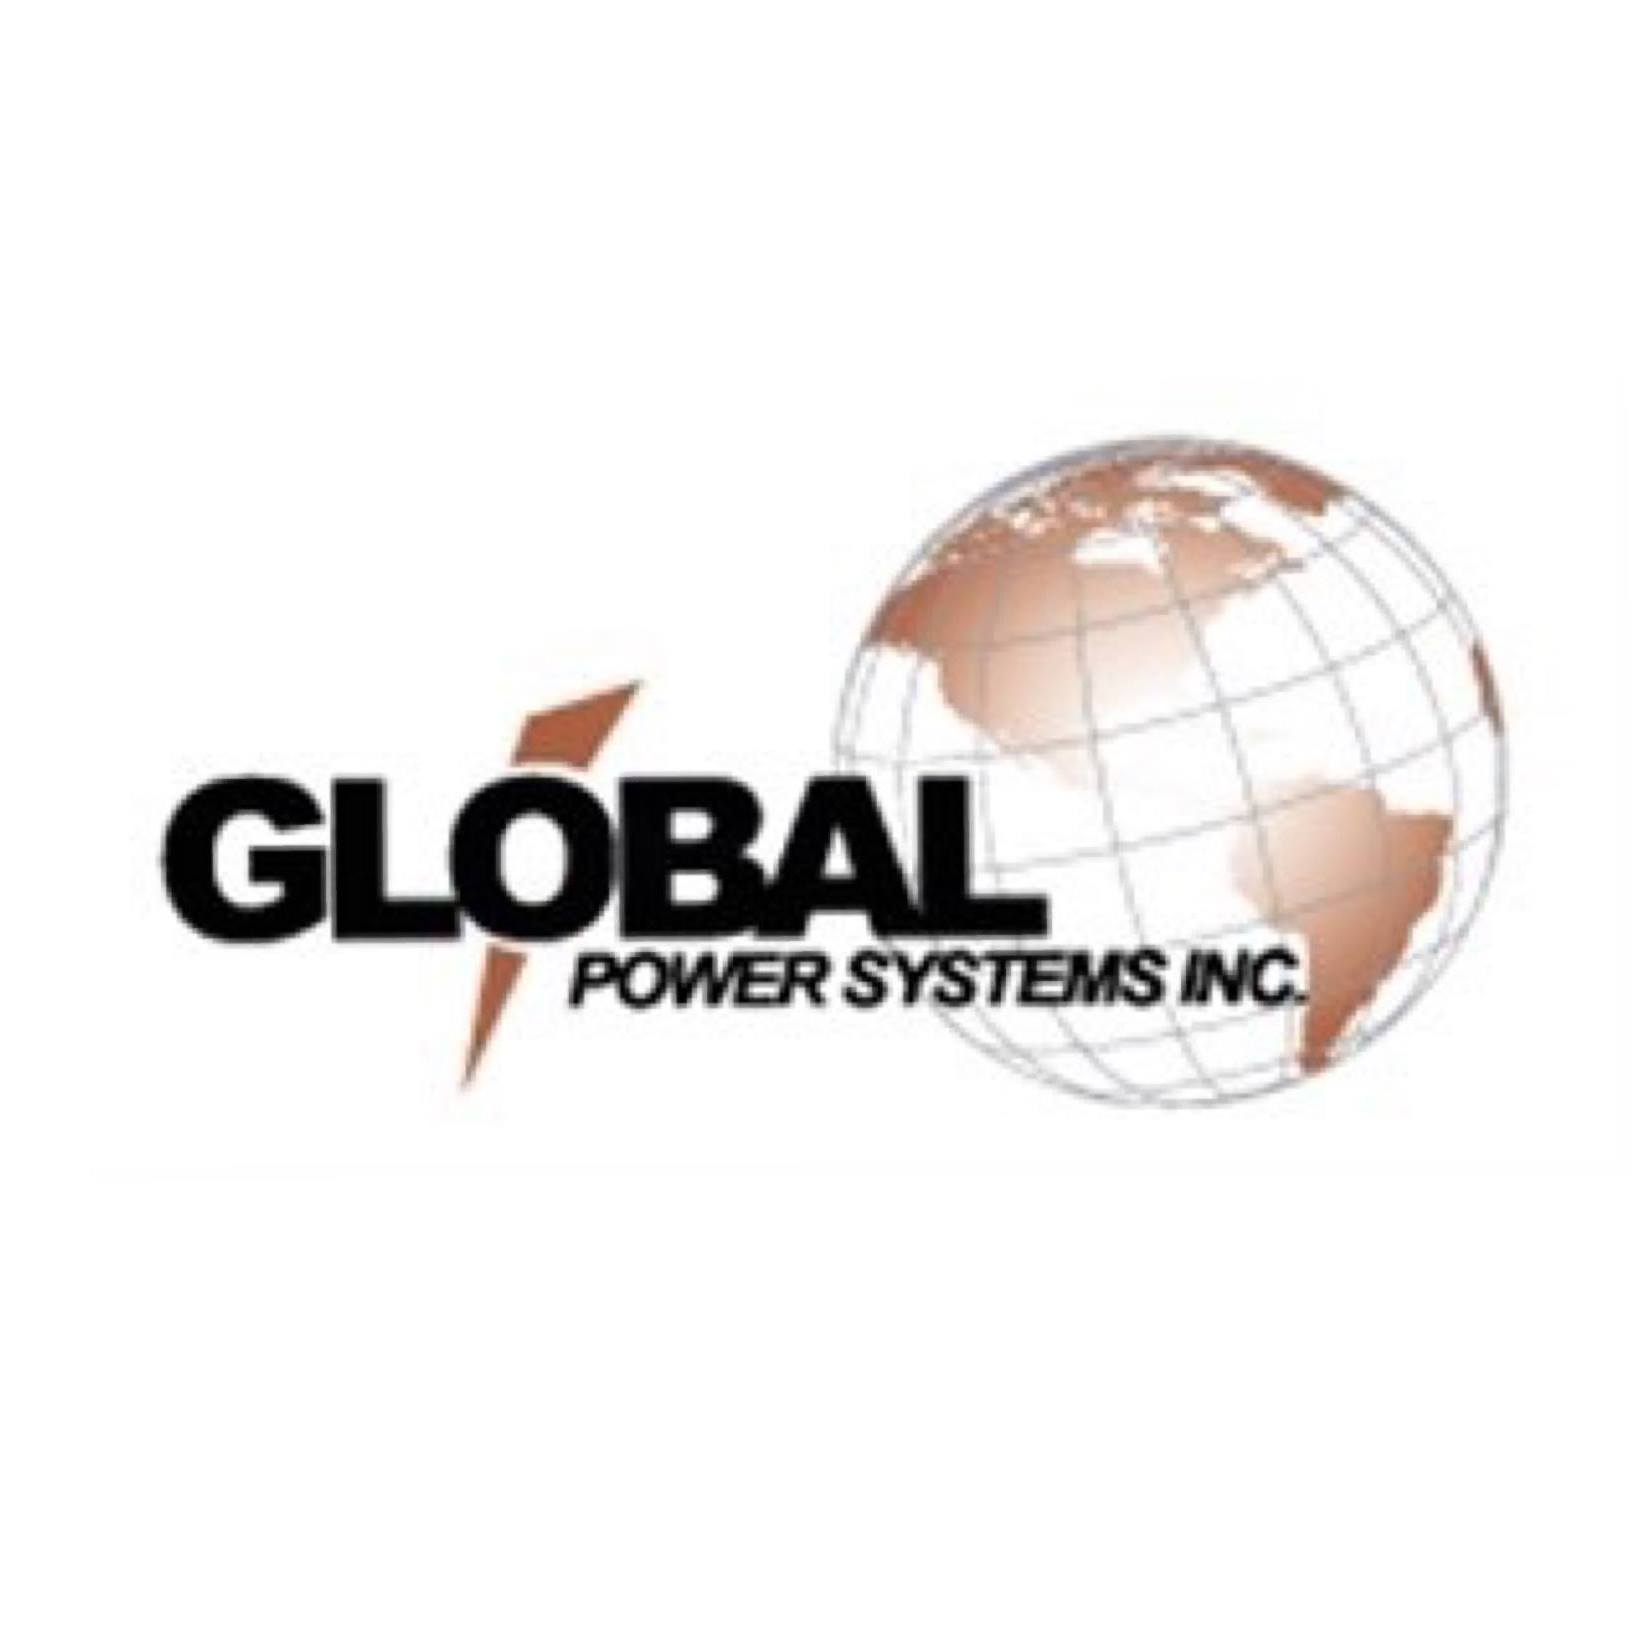 Global Power Systems